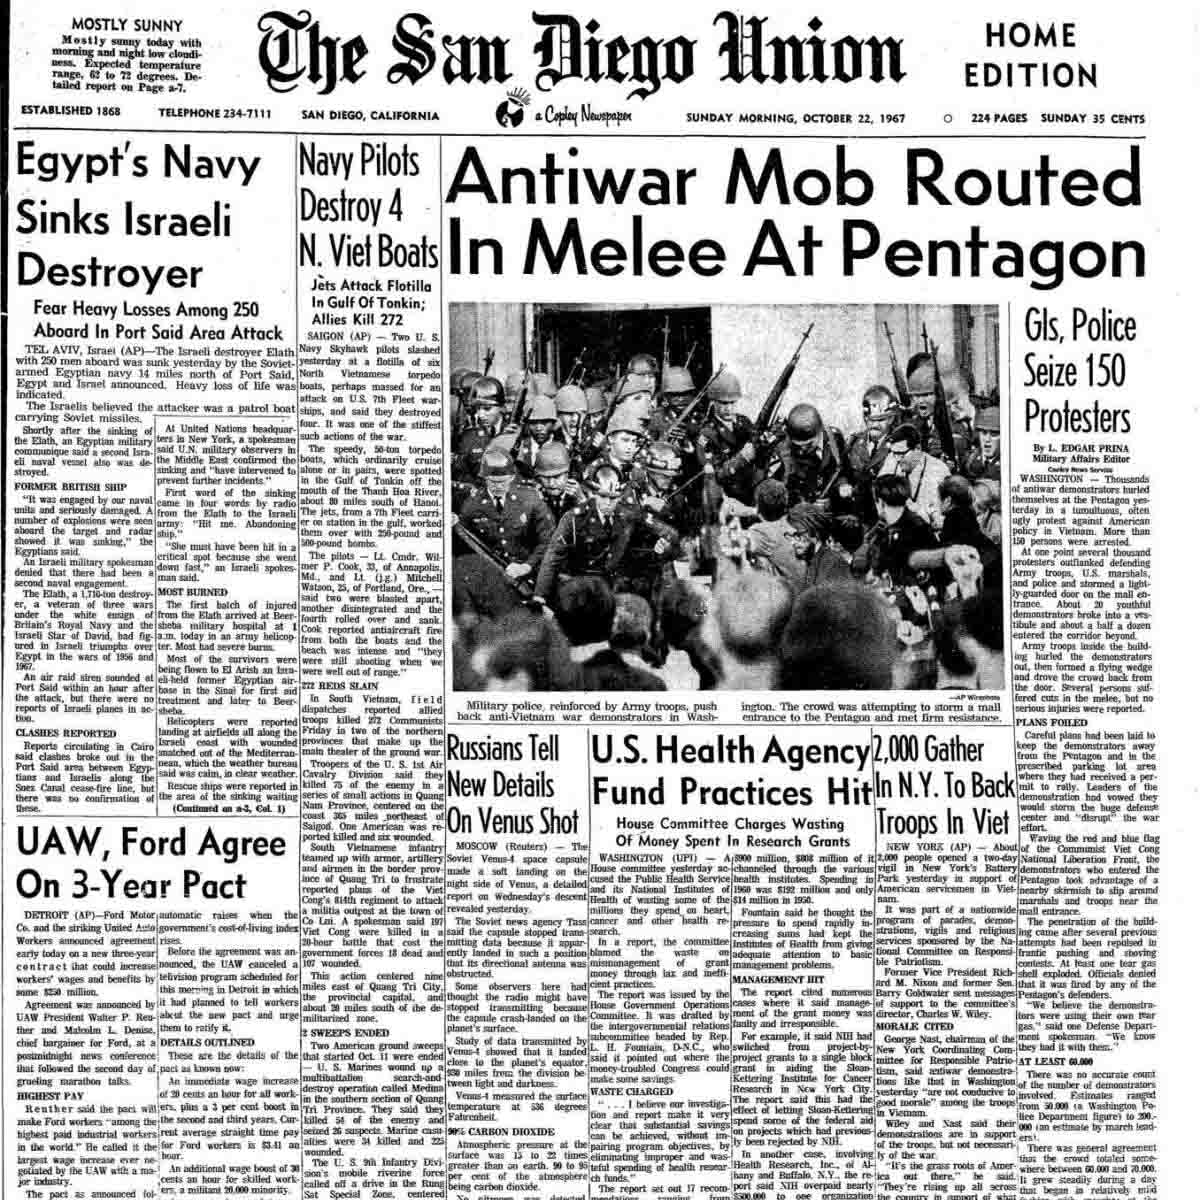 1967 March on the Pentagon Anti-War Protest Headline in the San Diego Union